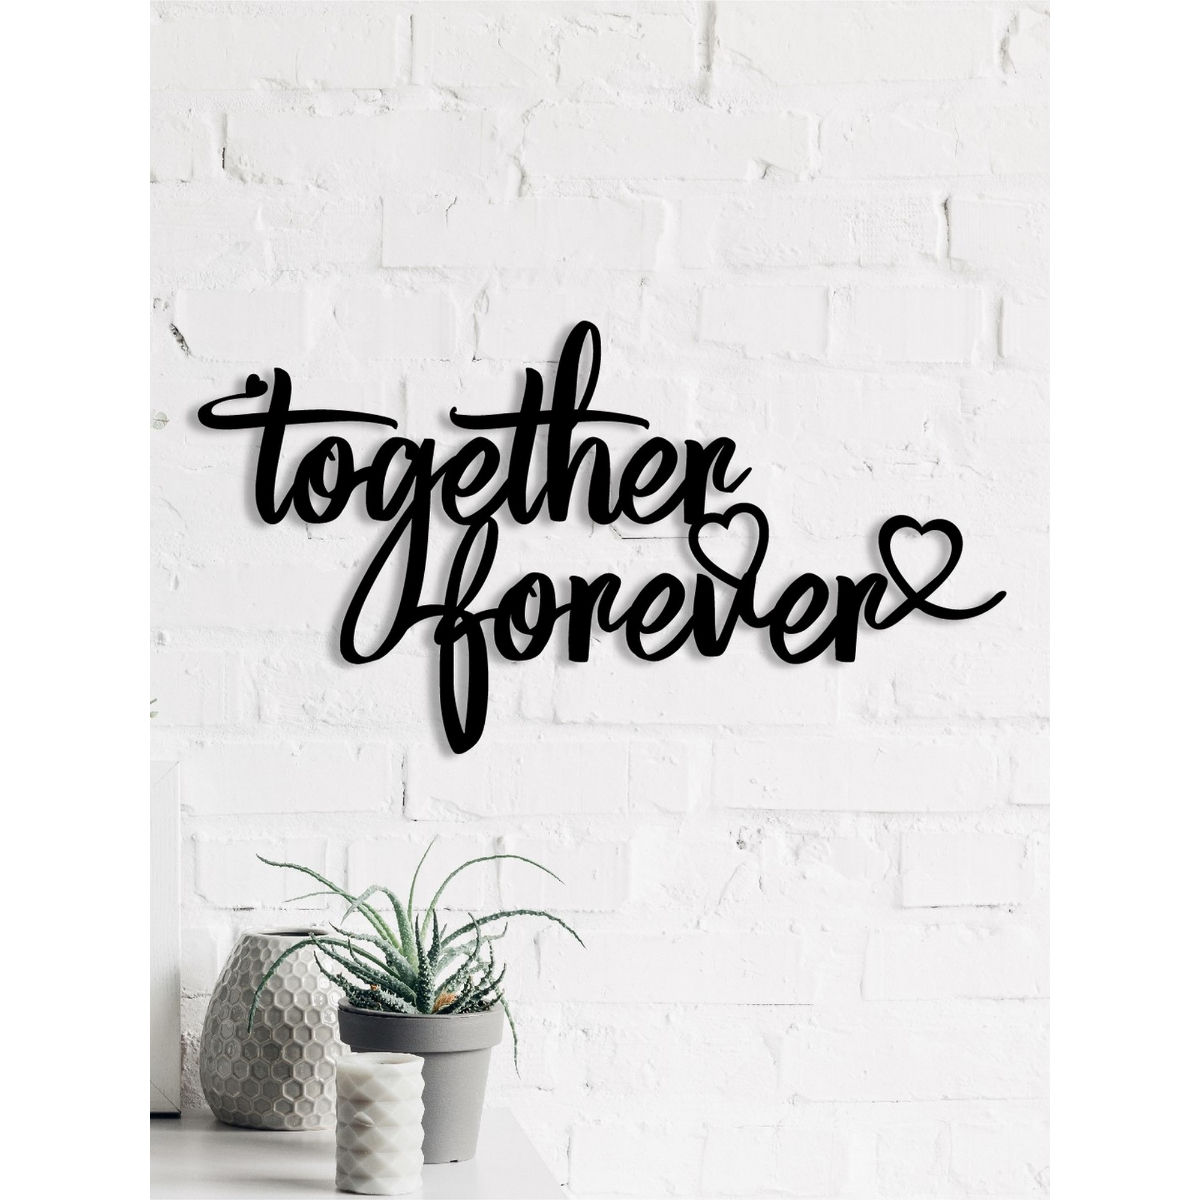 eCraftIndia "Together Forever" Love Theme Black Wood Wall Art Cutout